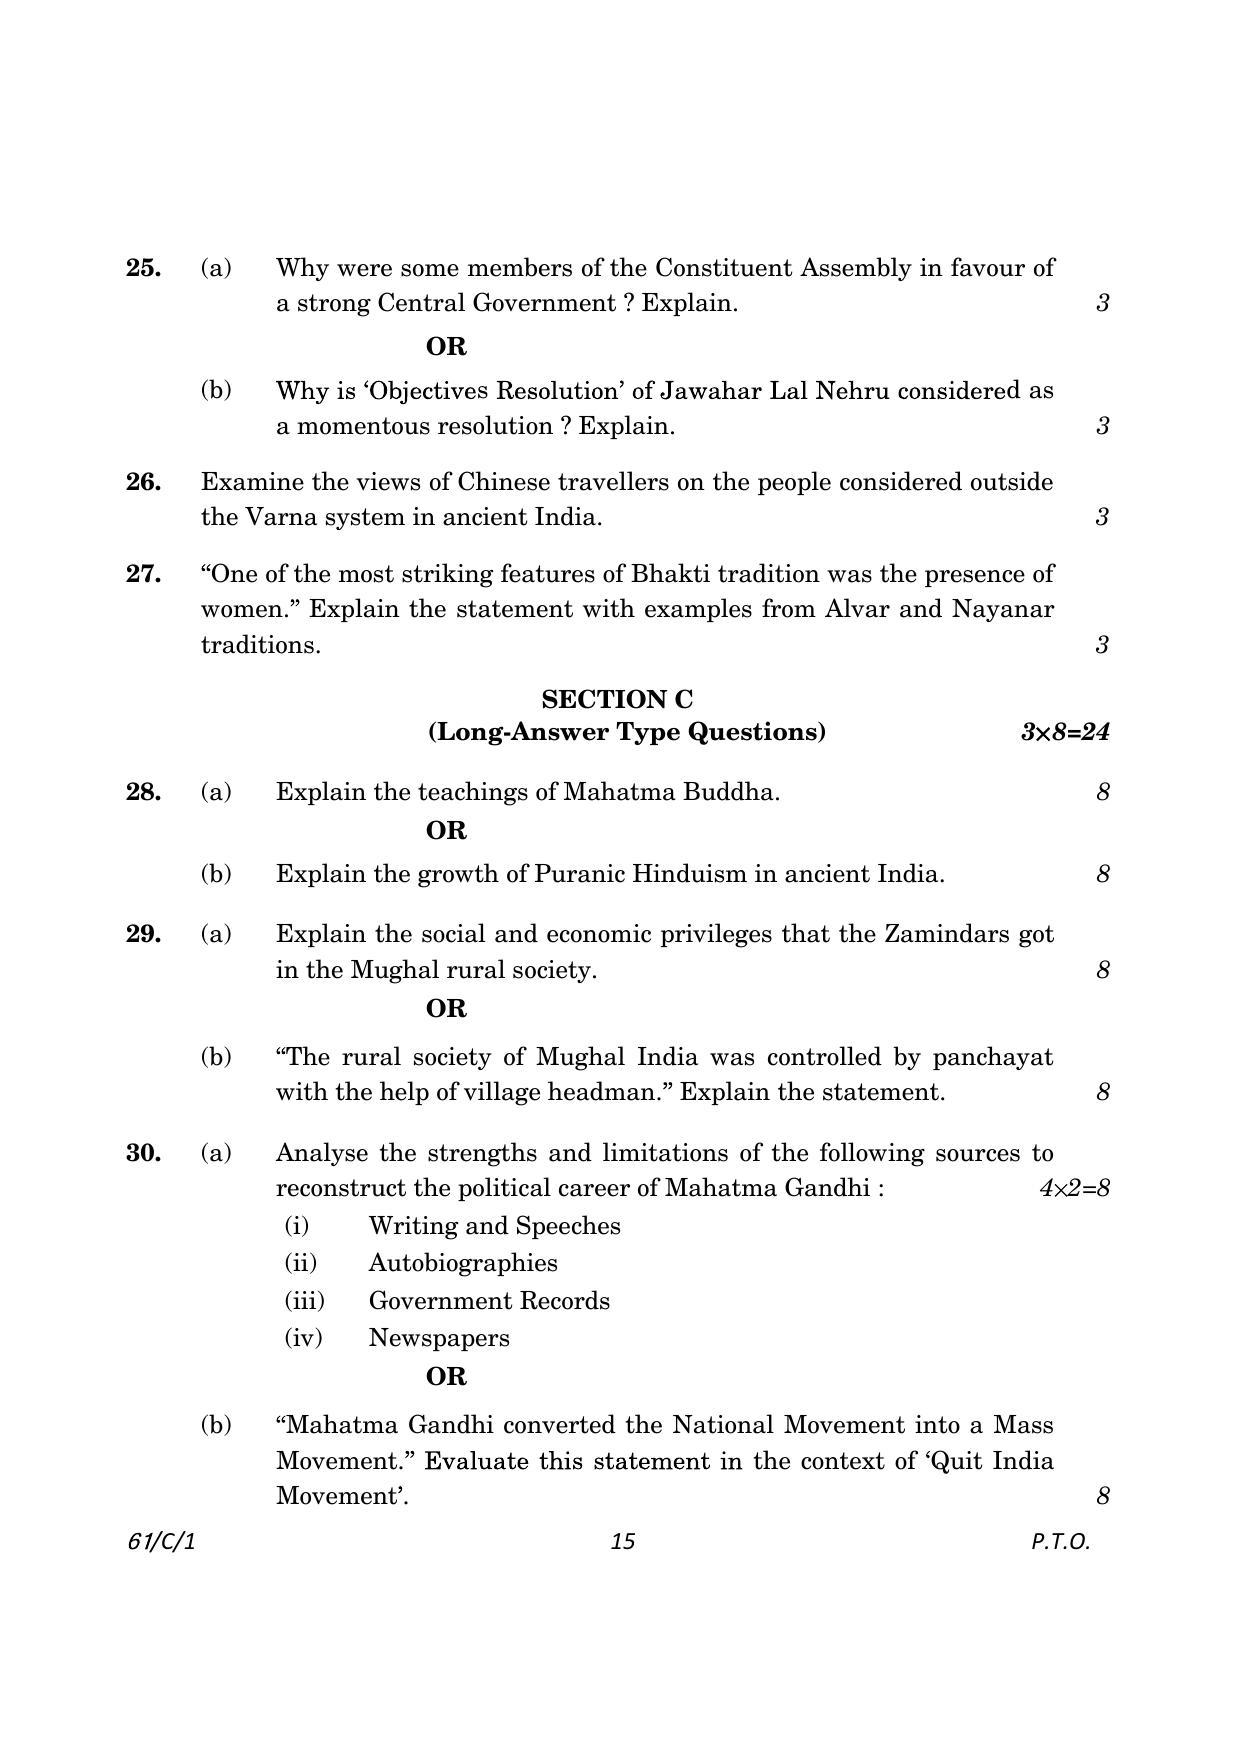 CBSE Class 12 61-1 History 2023 (Compartment) Question Paper - Page 15